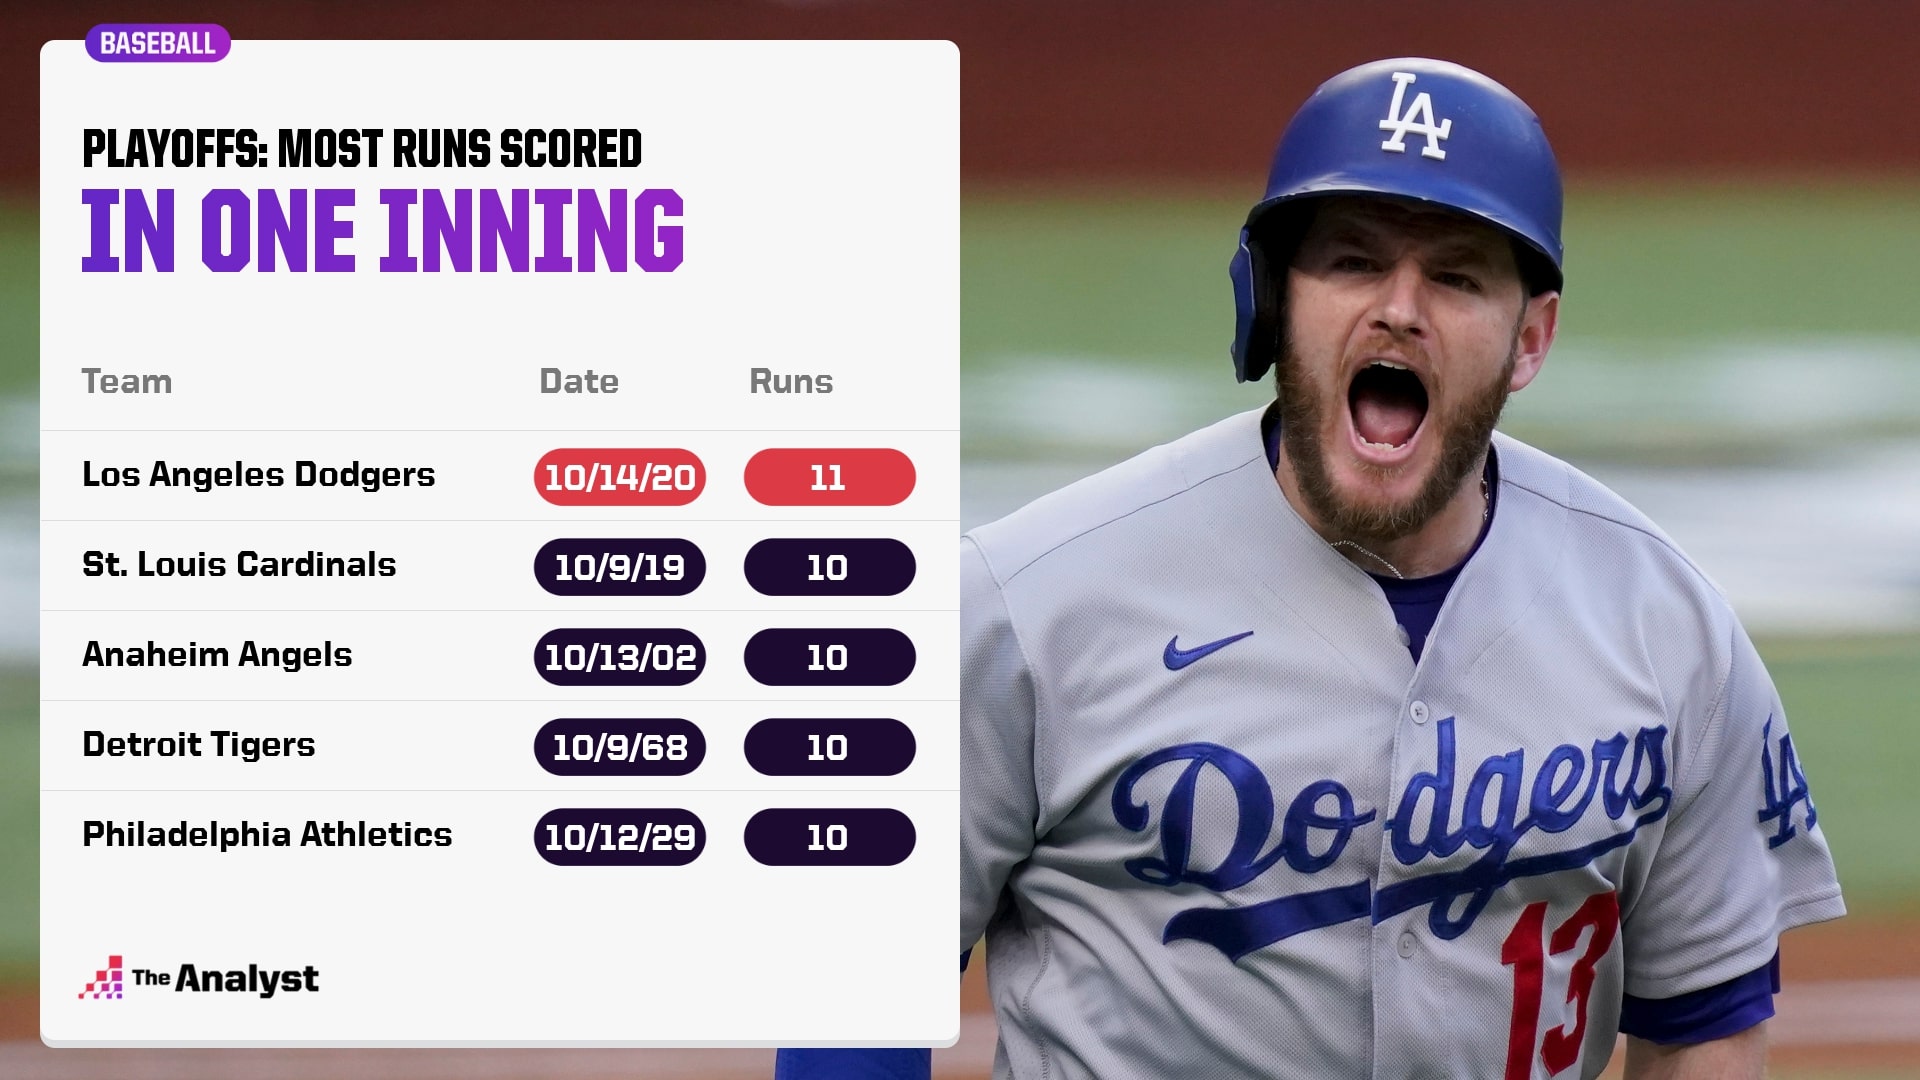 The HighestScoring Games in MLB History